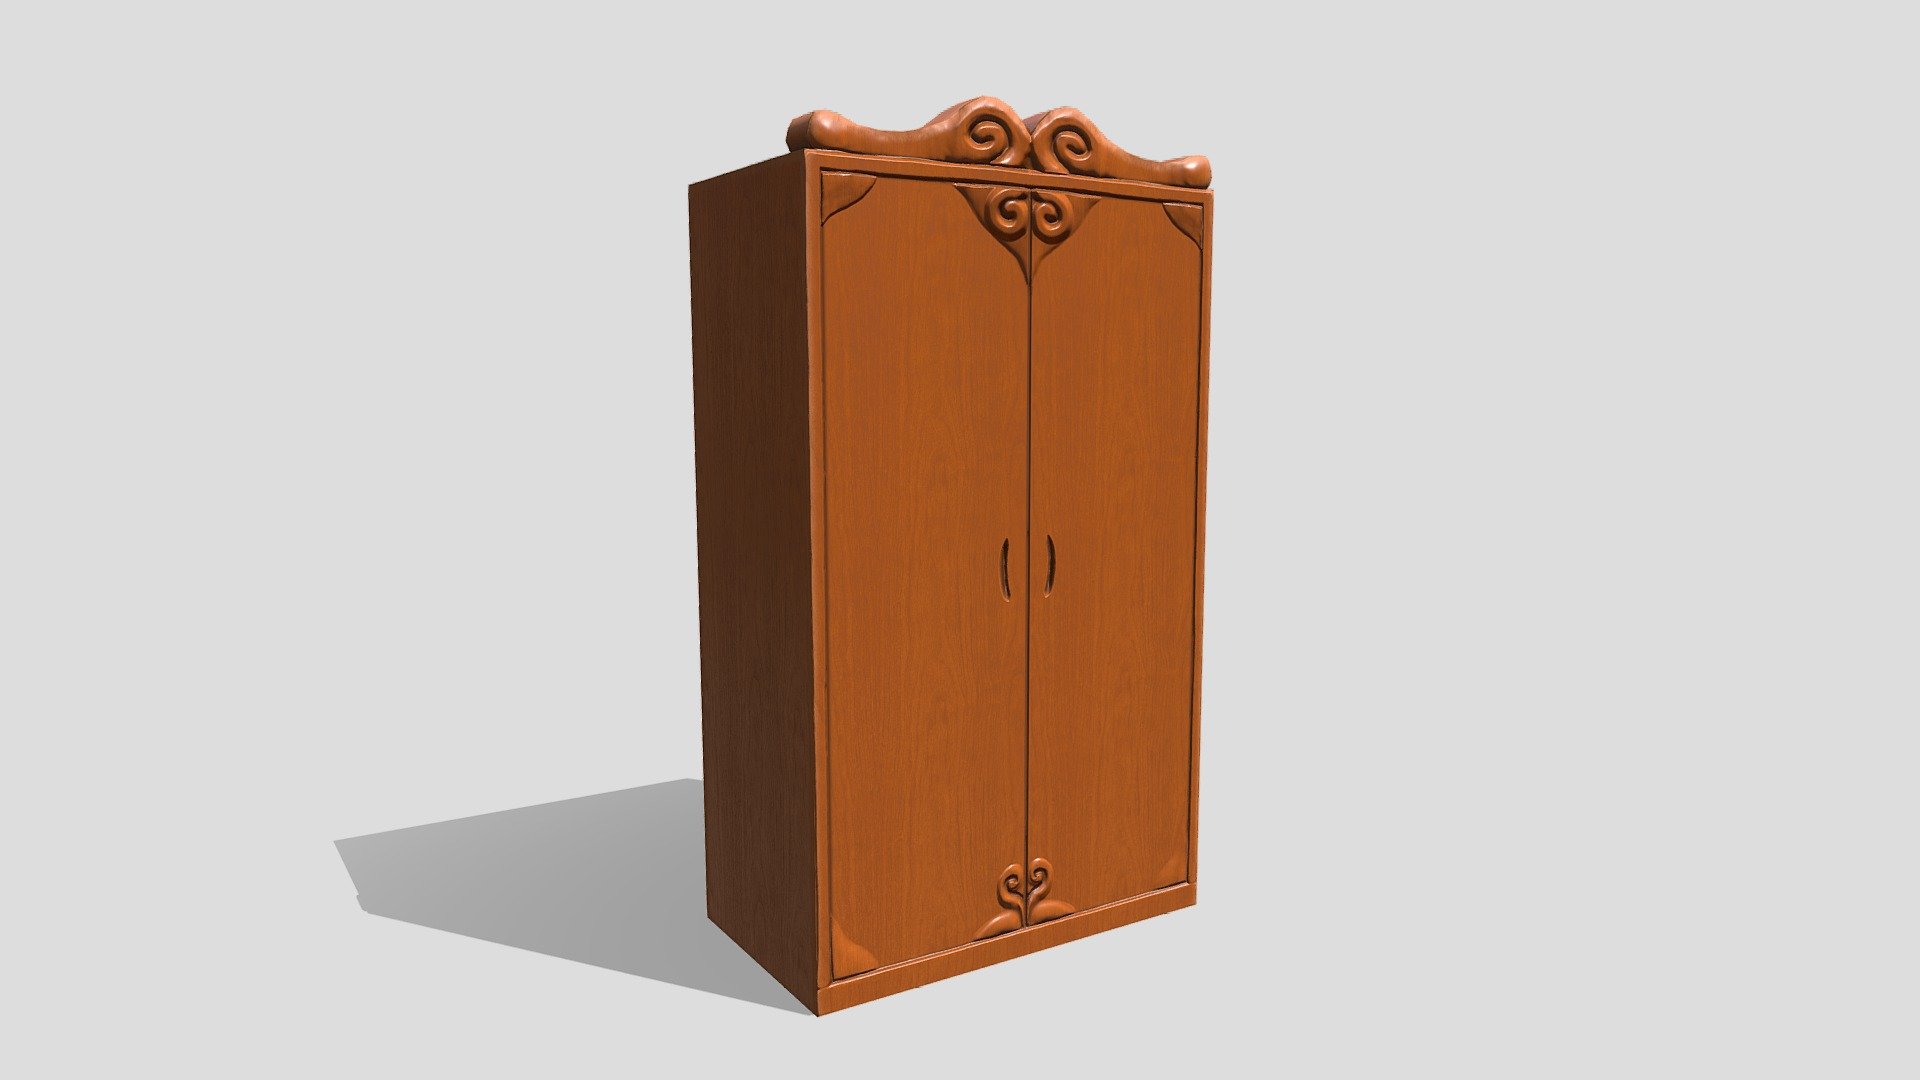 A wooden toon-style wardrobe for a comic or low-poly setting.

Includes the model and textures 3d model